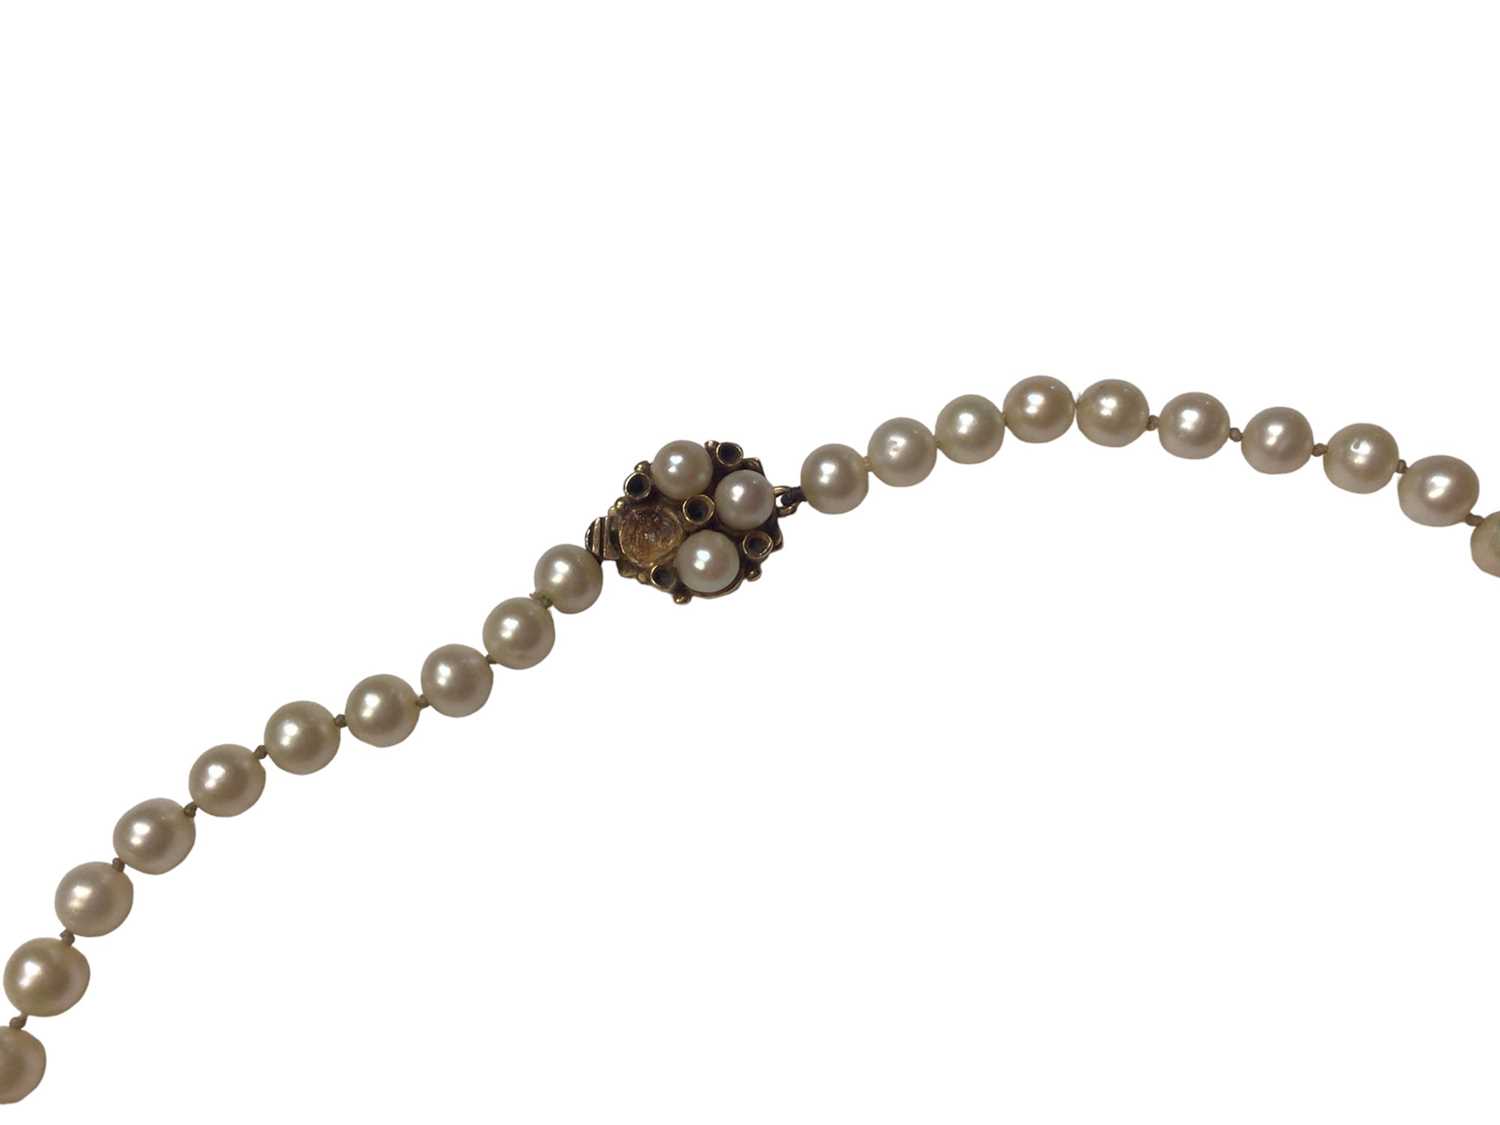 Cultured pearl necklace with 9ct gold clasp and two single pearl earrings - Image 2 of 2